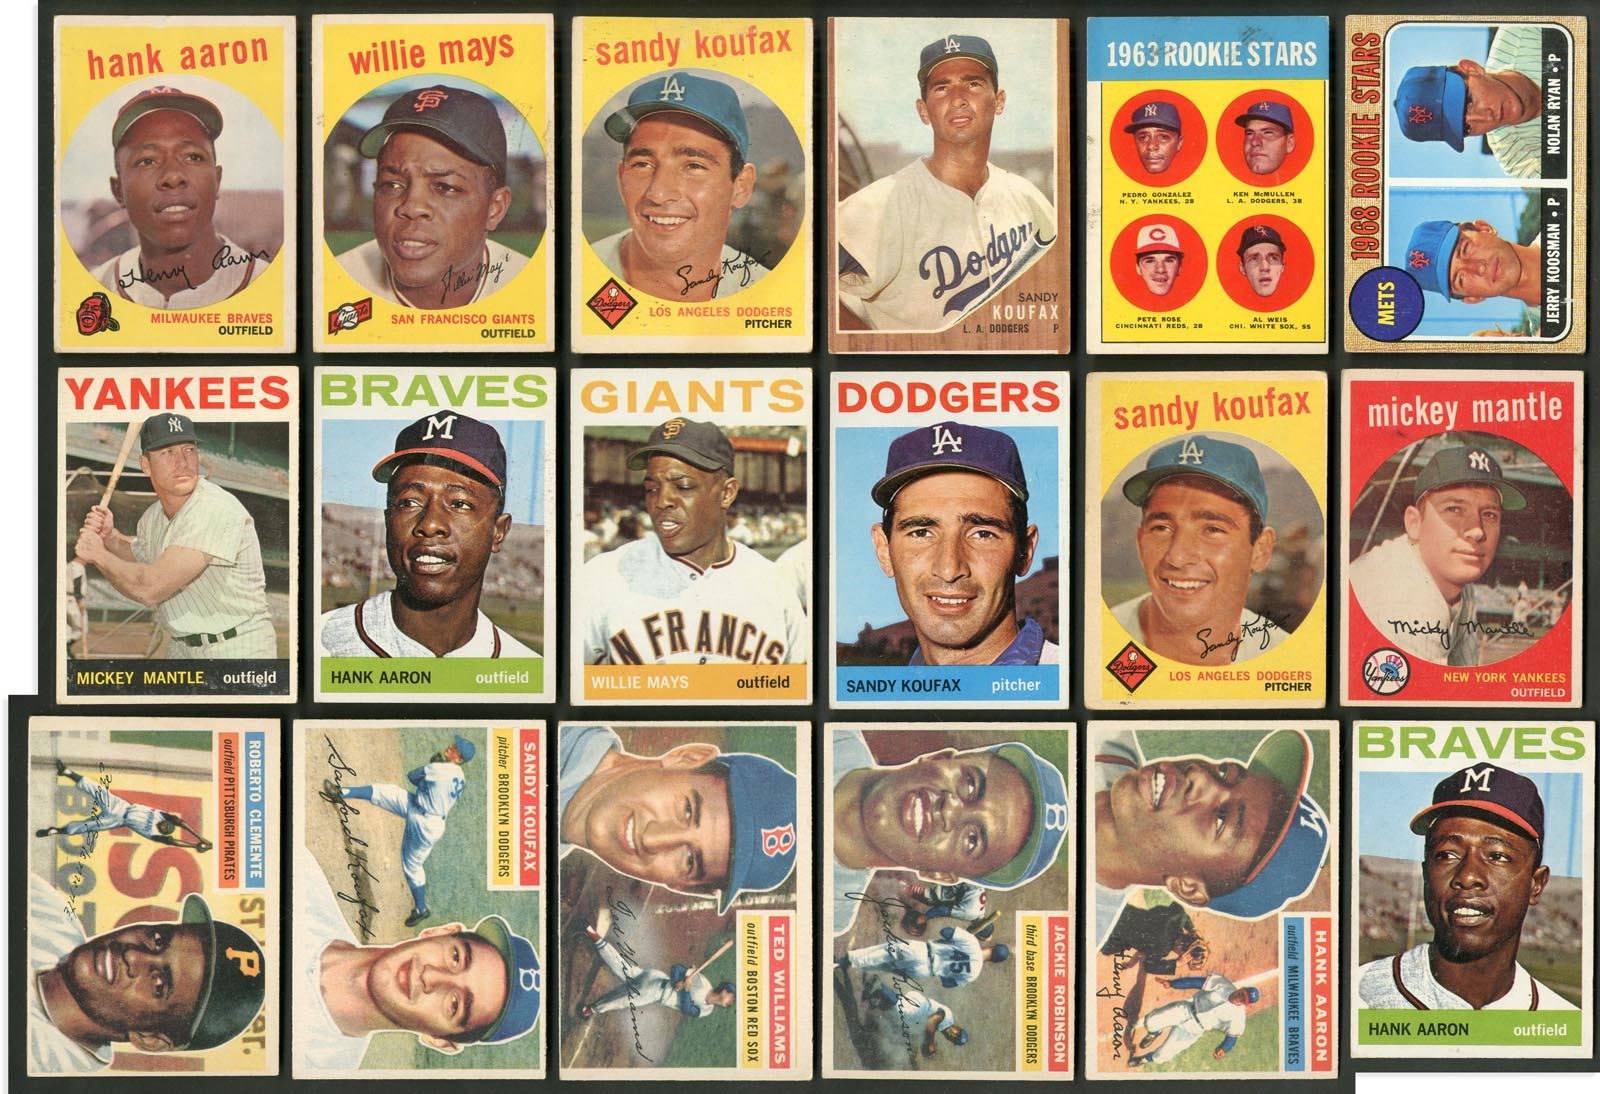 Baseball and Trading Cards - 1930s-60s Topps, Bowman, Diamond Stars & More Hall of Famer Collection - (4) Mantle, (6) Aaron, (6) Clemente, (6) Koufax, (5) Mays (210+)